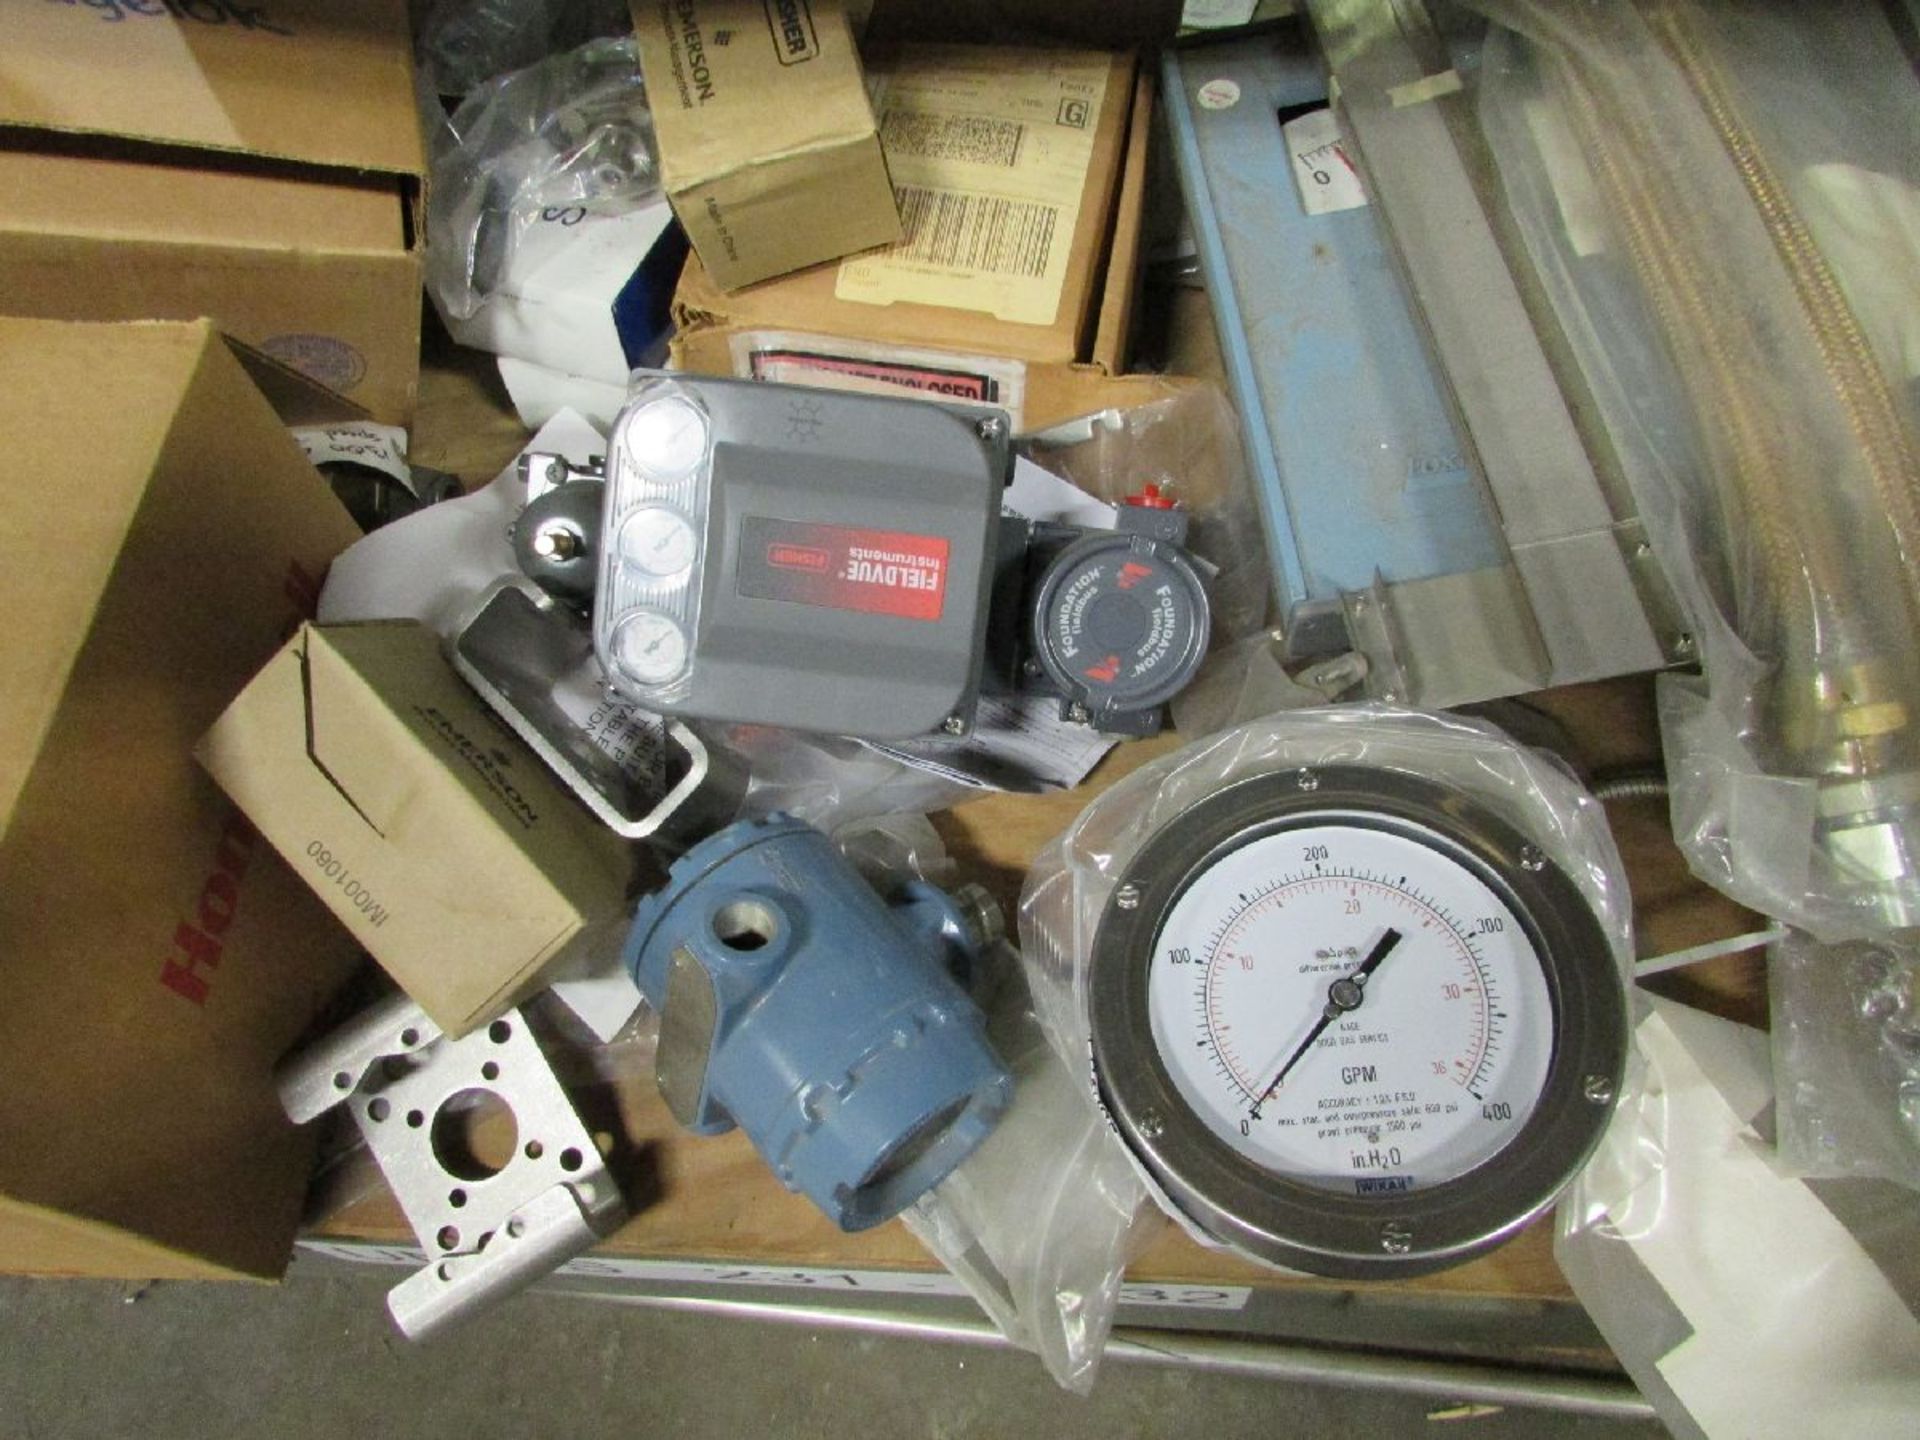 Lot of Assorted Power Supplies, Swagelok, Honeywell Displays, Valves Spare Parts - Image 7 of 12